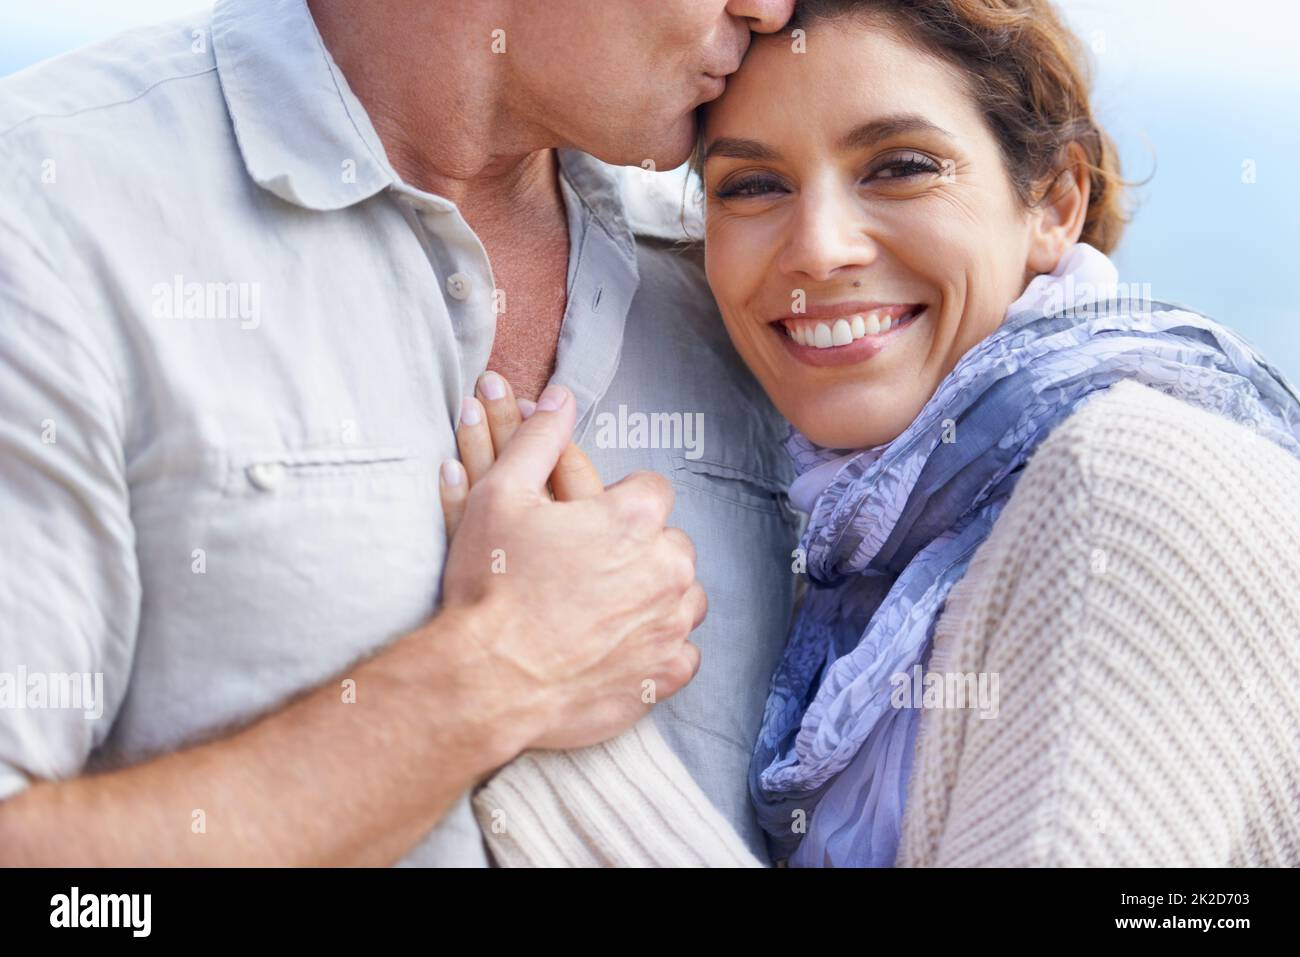 Hes the love of my life. Cropped portrait of mature woman resting her head on her husbands chest. Stock Photo